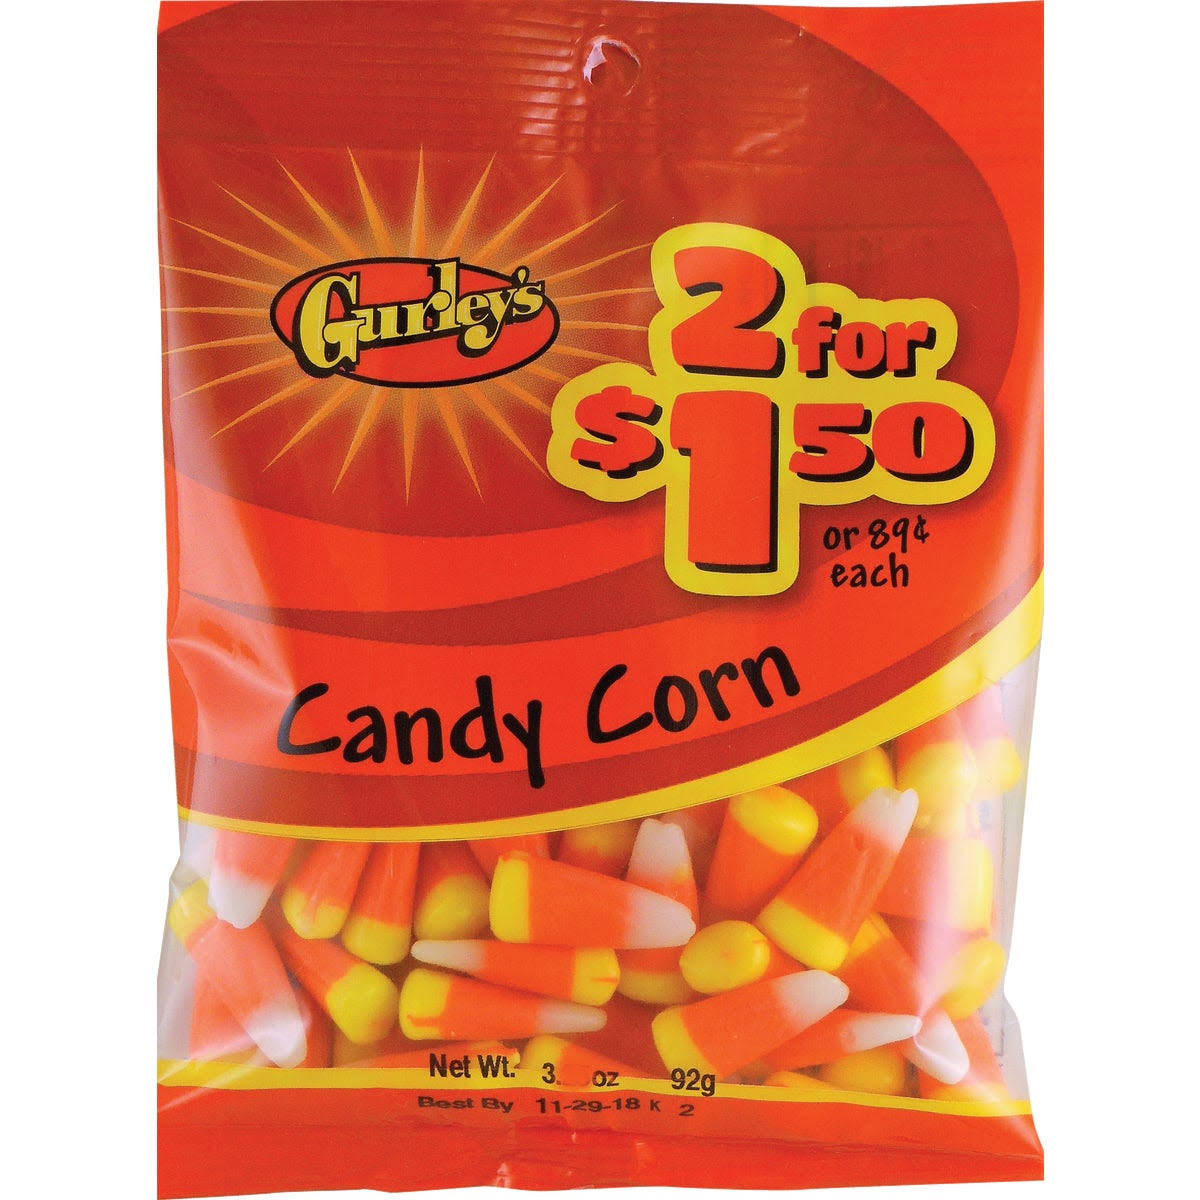 Gurley's 19051 2 for Candy Corn (3.25 Ounce, 12 per CASE)